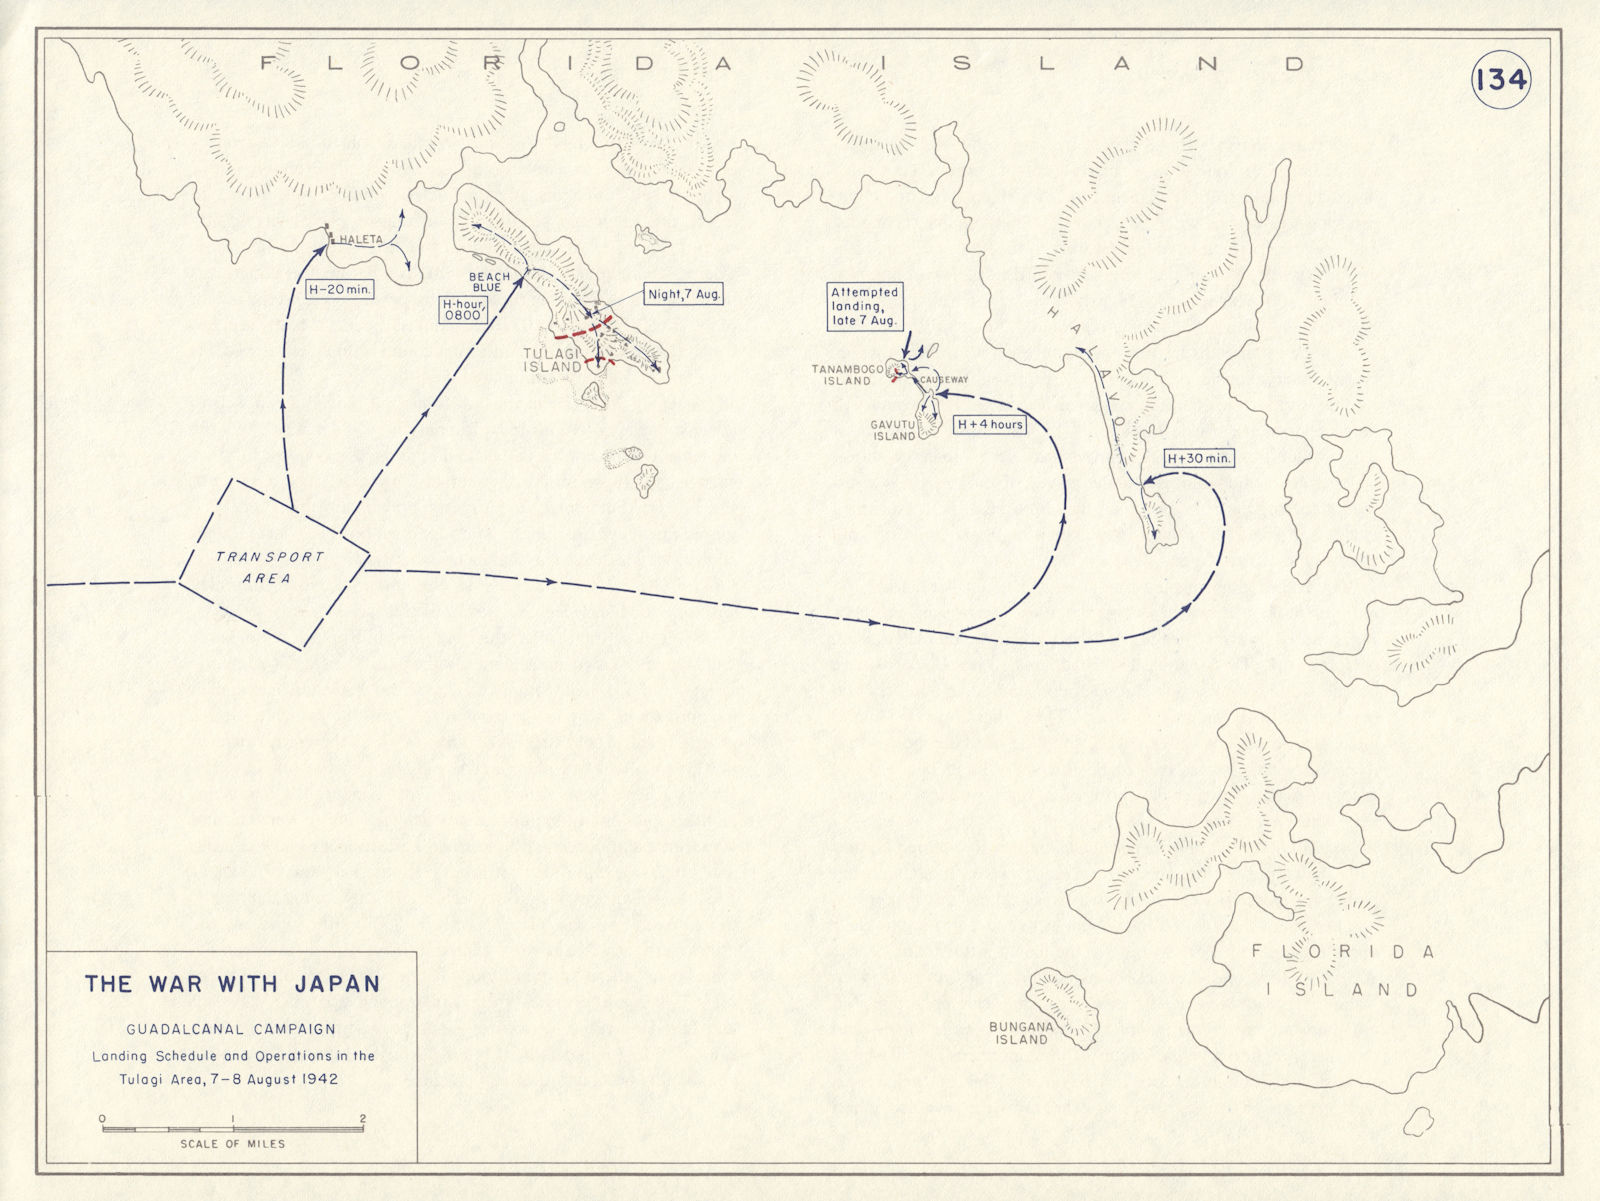 Associate Product World War 2. Guadalcanal Campaign 7-8 Aug 1942 Tulagi Landing Schedule 1959 map